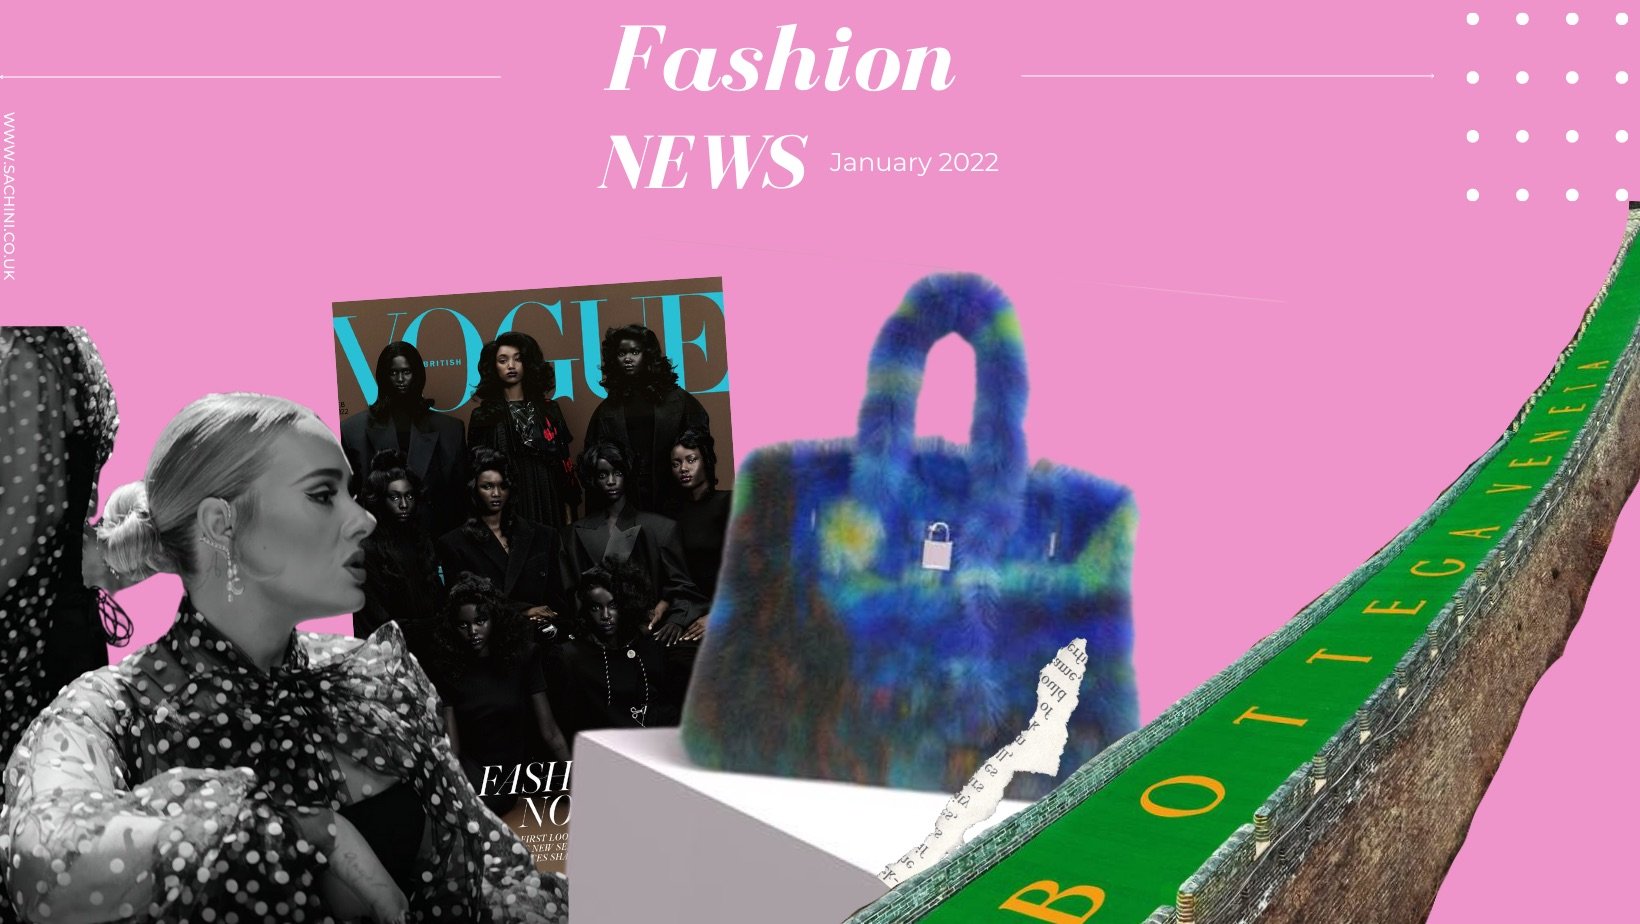 Fashion News - January 2022 - That Vogue Cover, Oh my god Adele! and Who is Hermes suing?